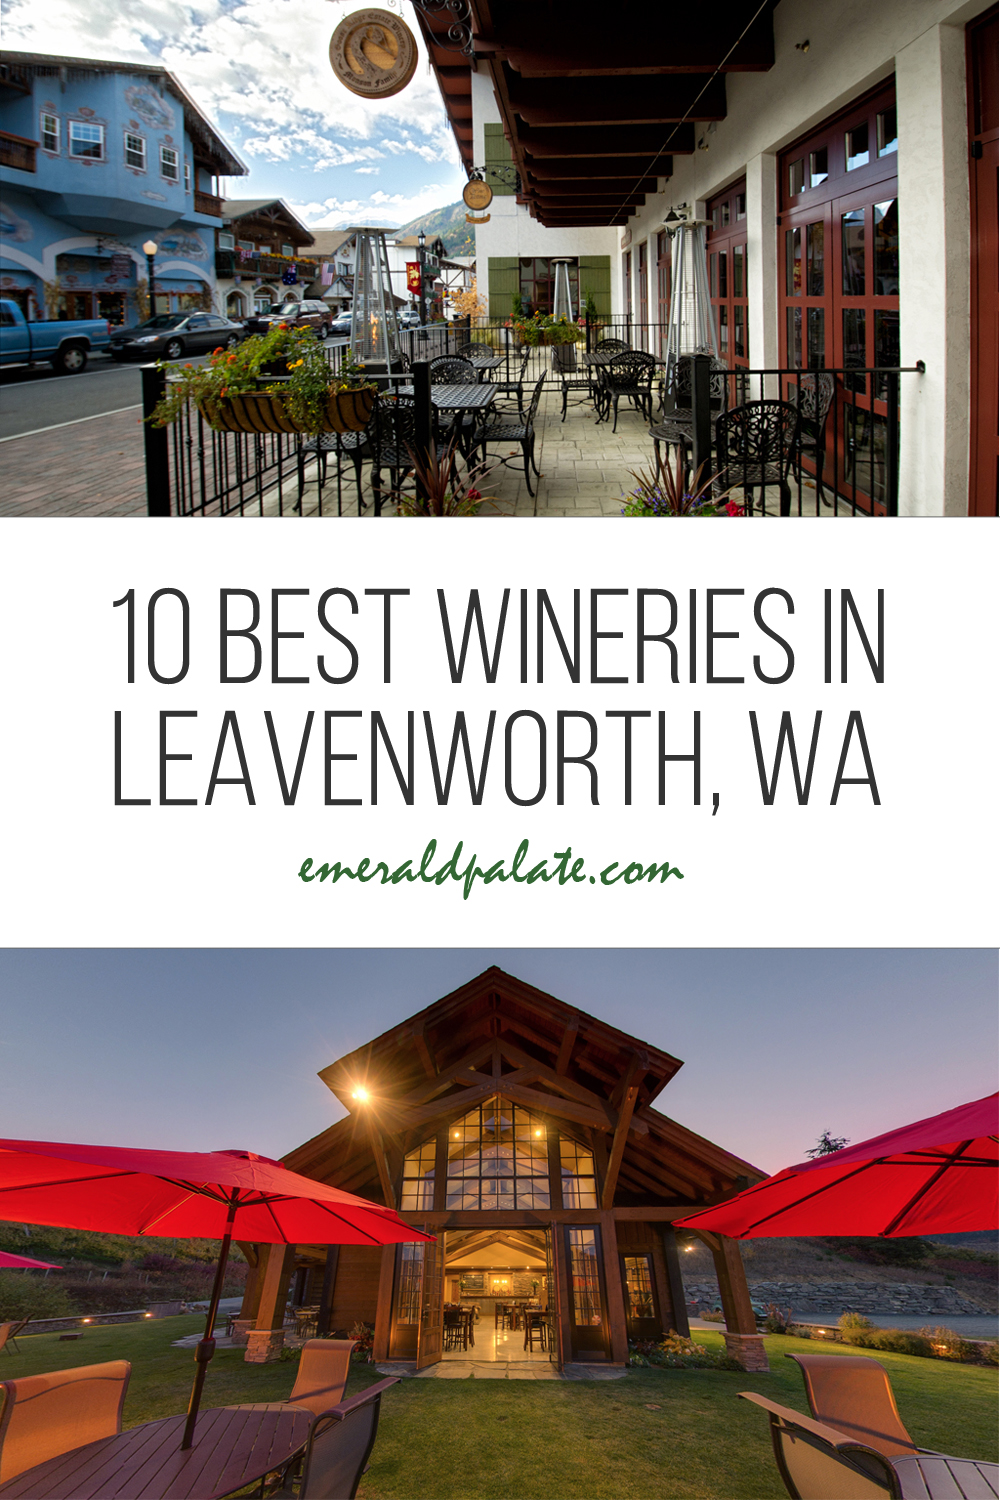 Things to Do in Vancouver, WA That'll Make You Excited to Visit